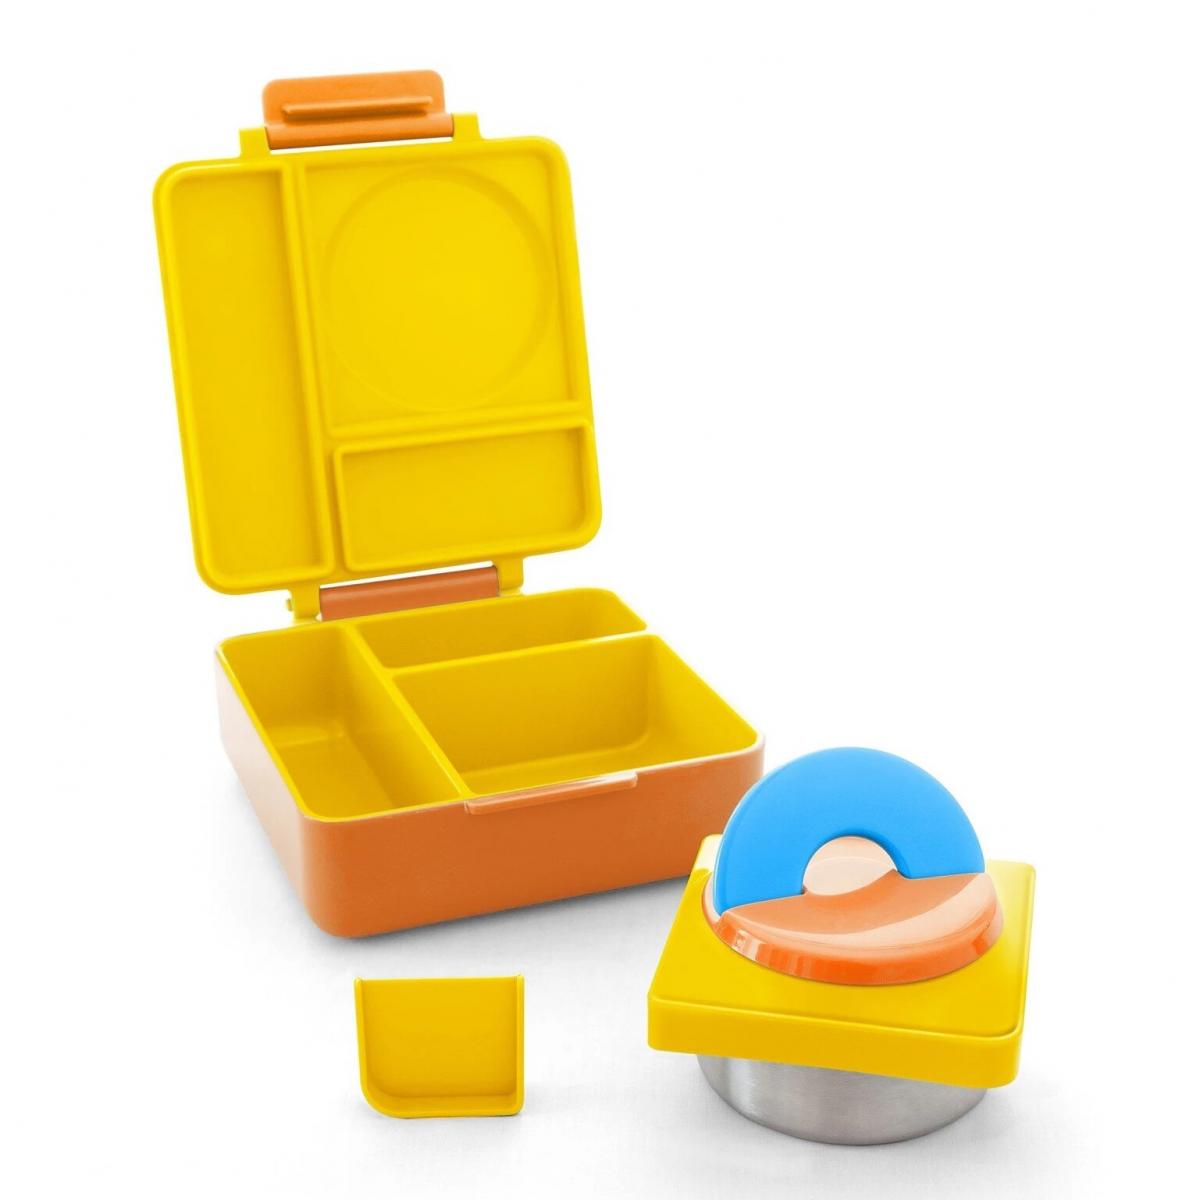 OmieBox - Hot and cold three-layer leak-proof lunch box - Orange